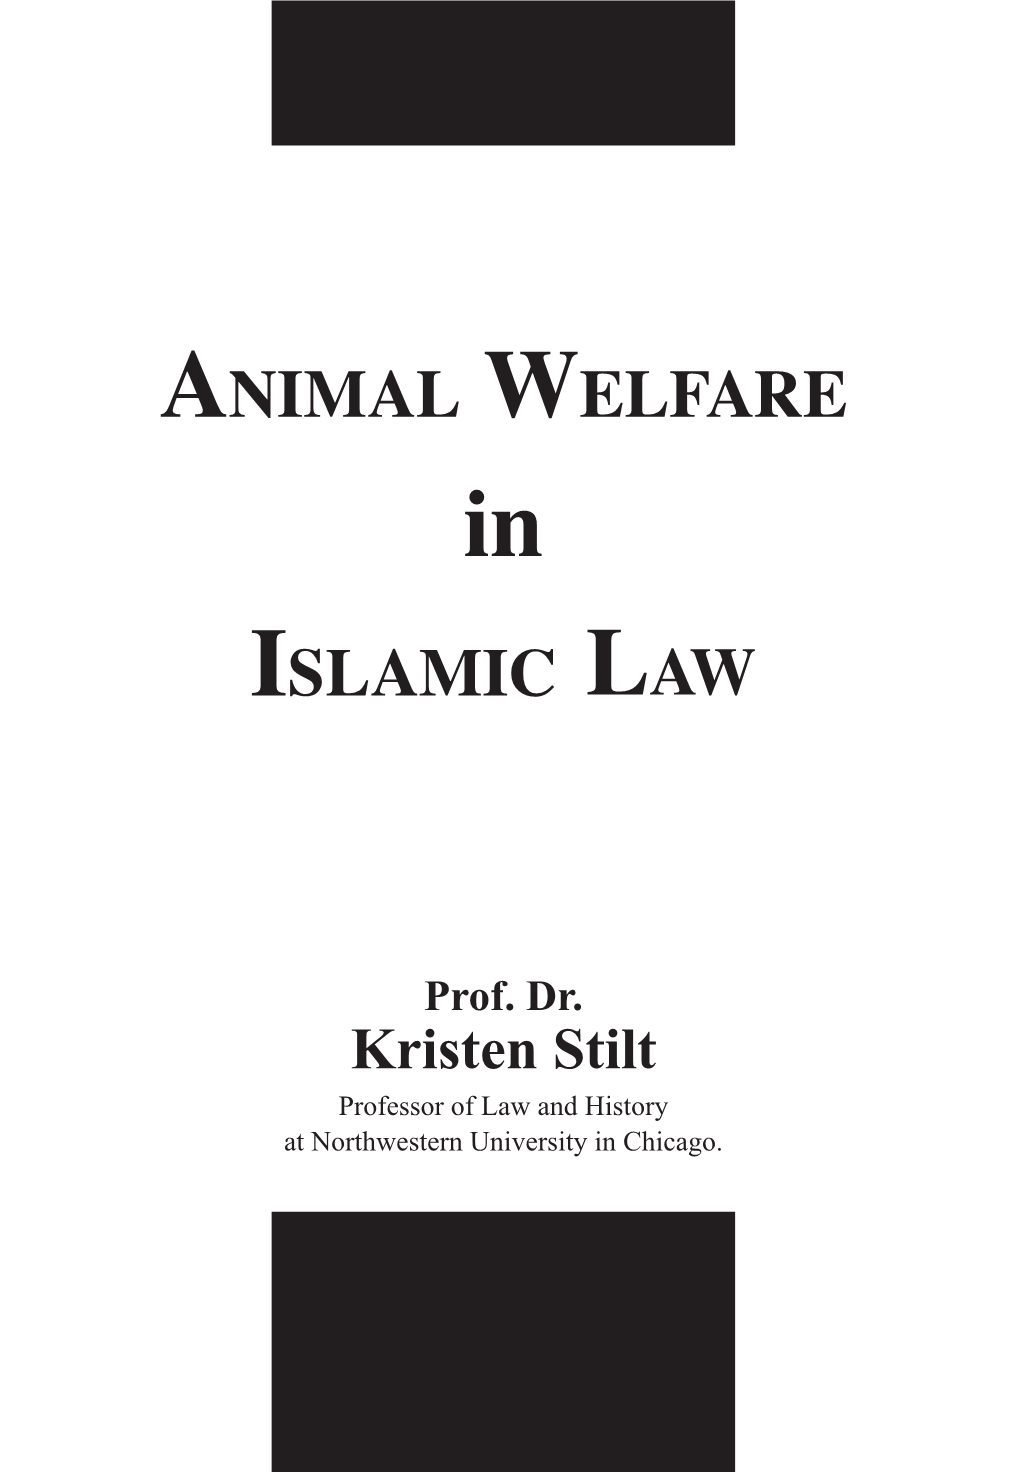 Animal Welfare in Islamic Law.” It Consists of Forty-Eight (48) Medium-Sized Pages and Includes an Introduction and the Following Contents: 1